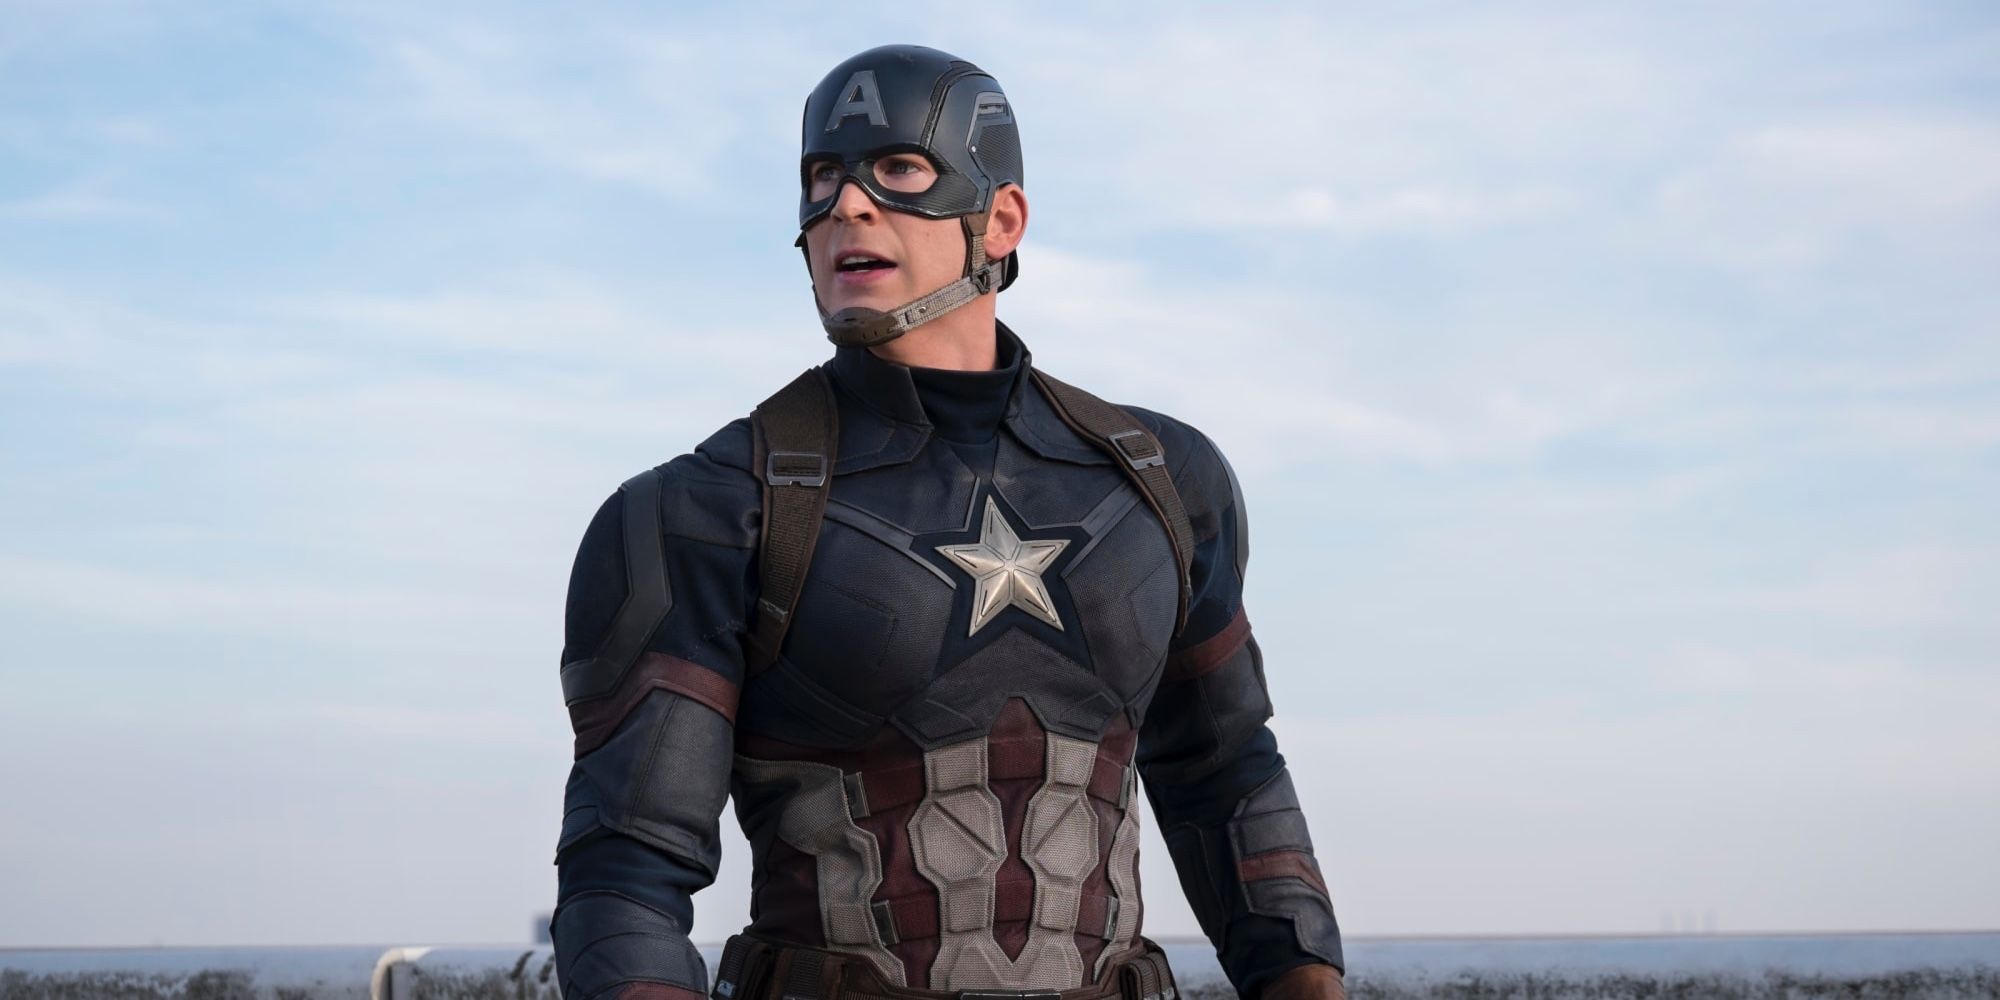 Chris Evans as Captain America in The Winter Soldier